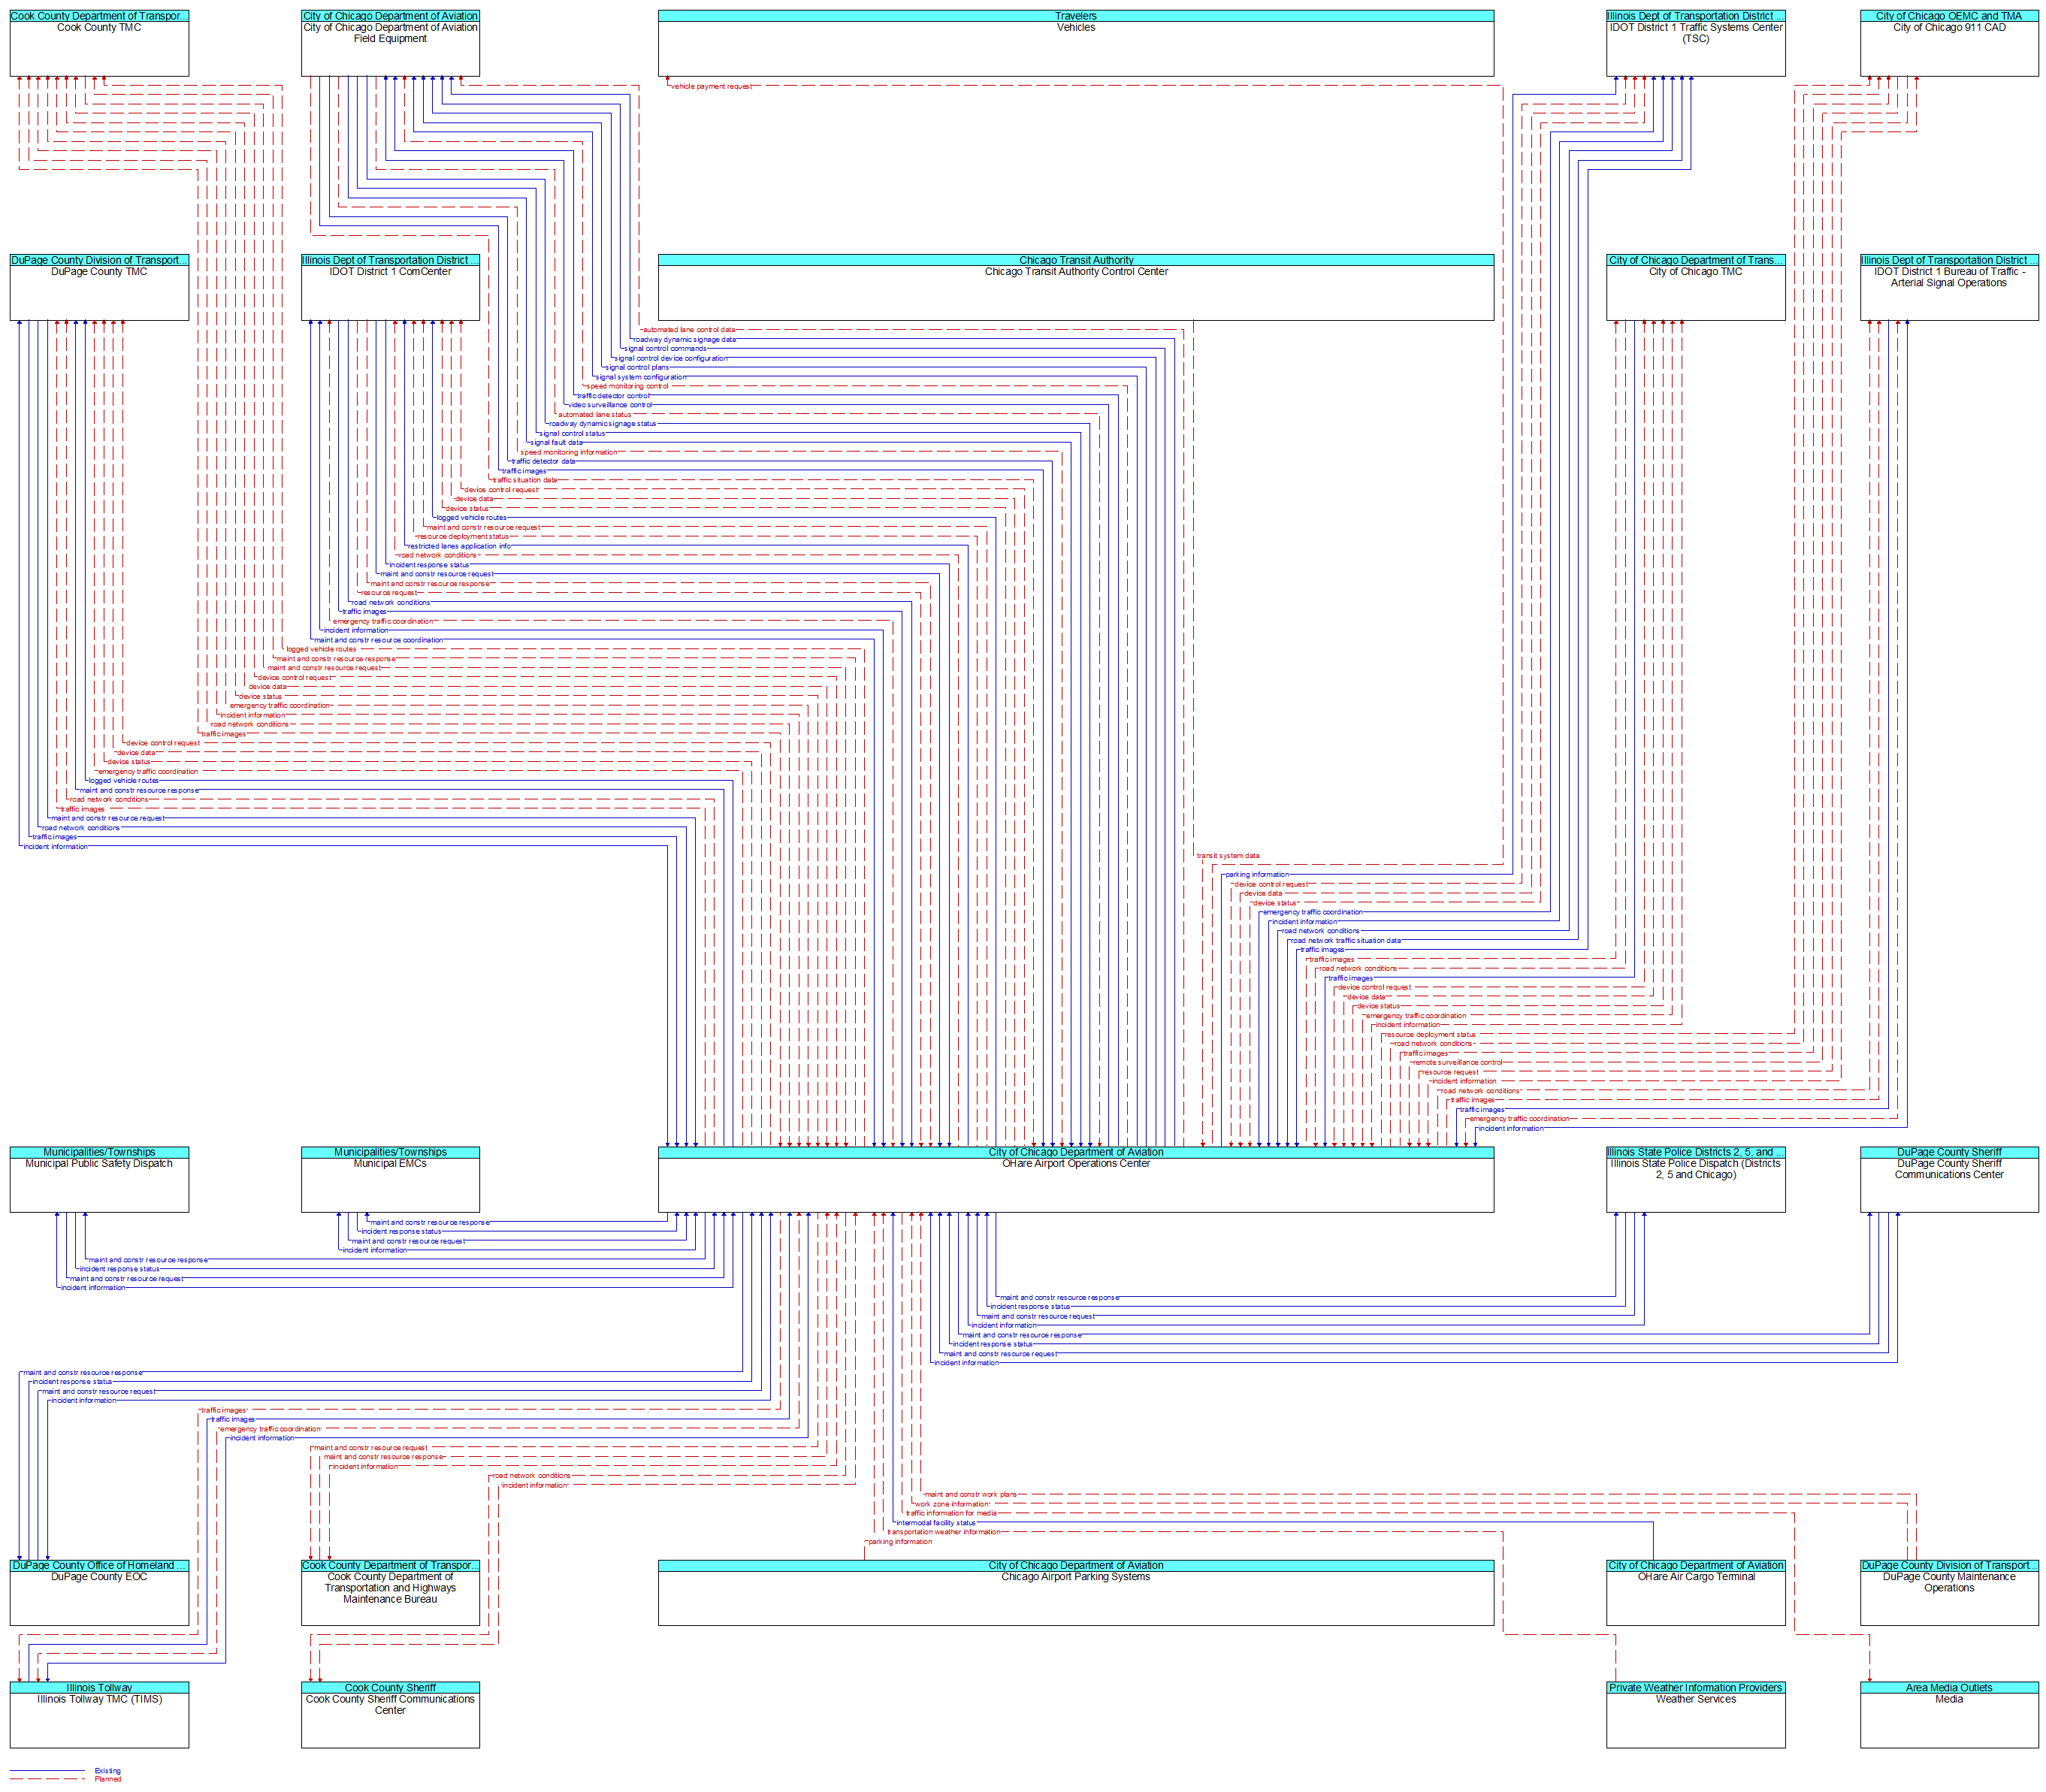 Context Diagram - OHare Airport Operations Center